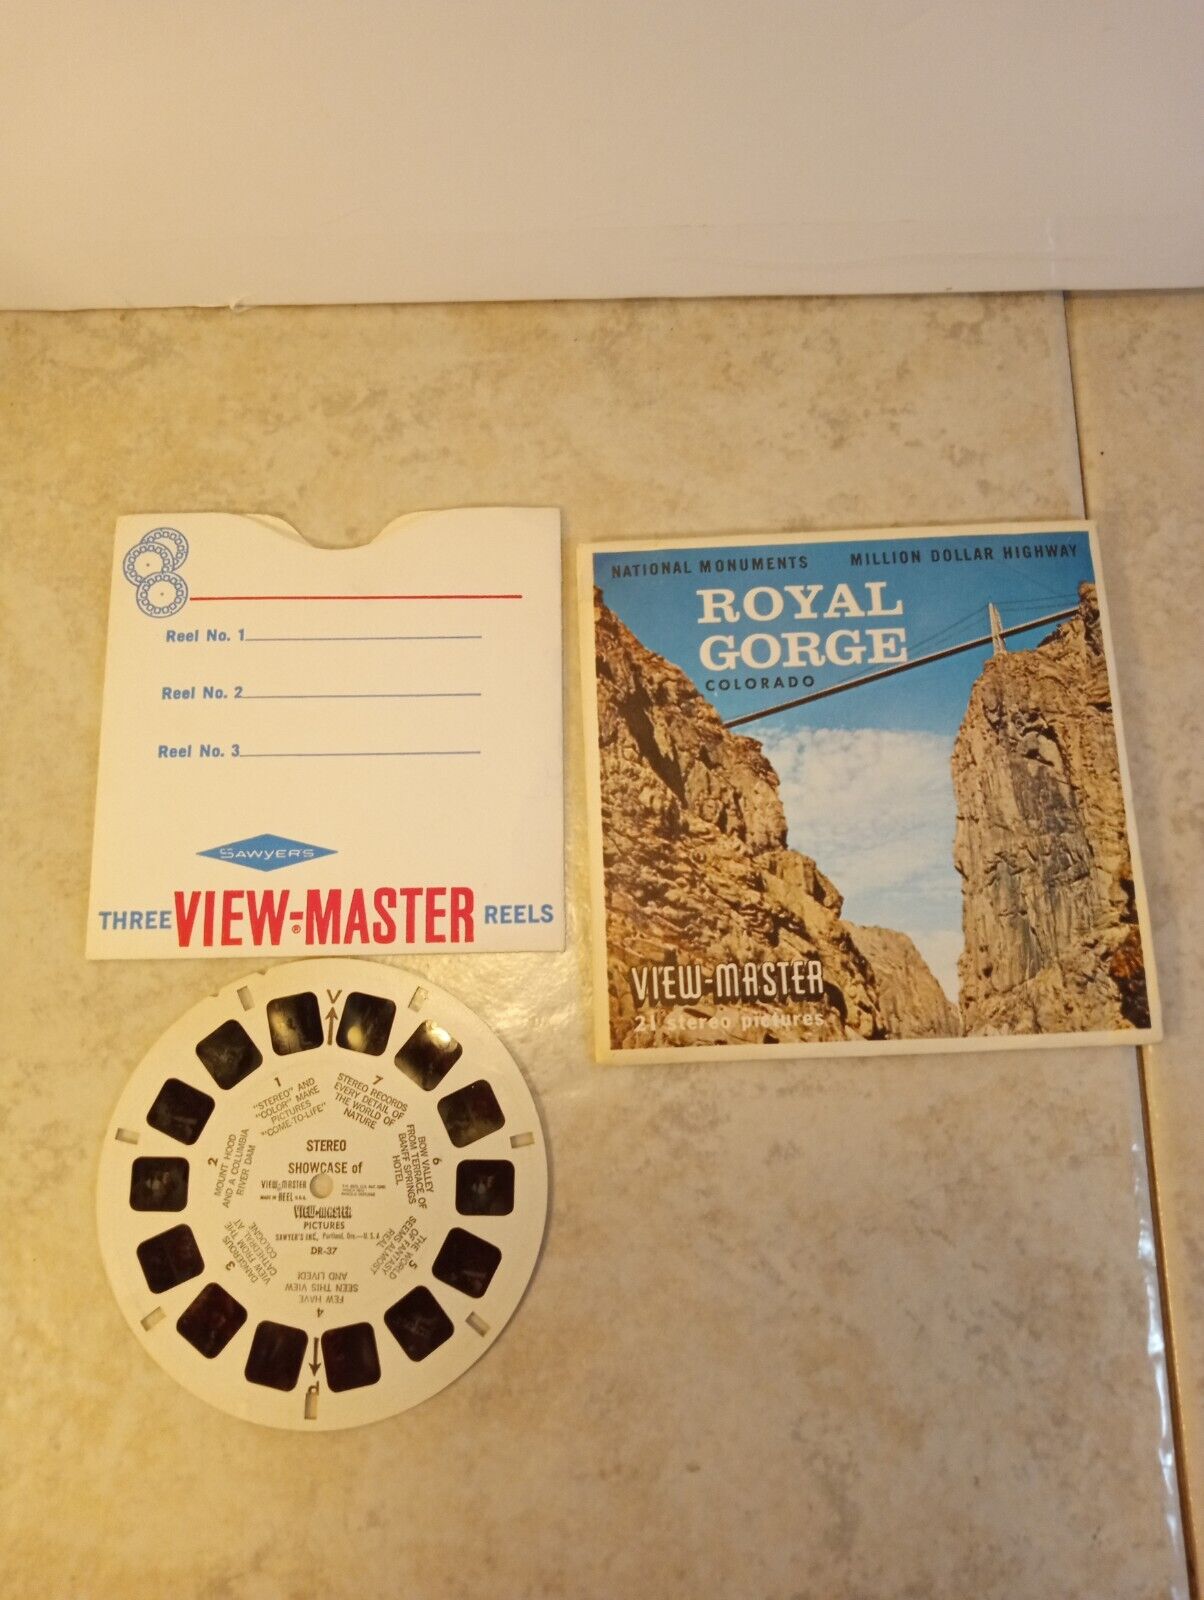 VIEWMASTER ROYAL GORGE COLORADO + SHOWCASE DEMO PICTURE REELS / 